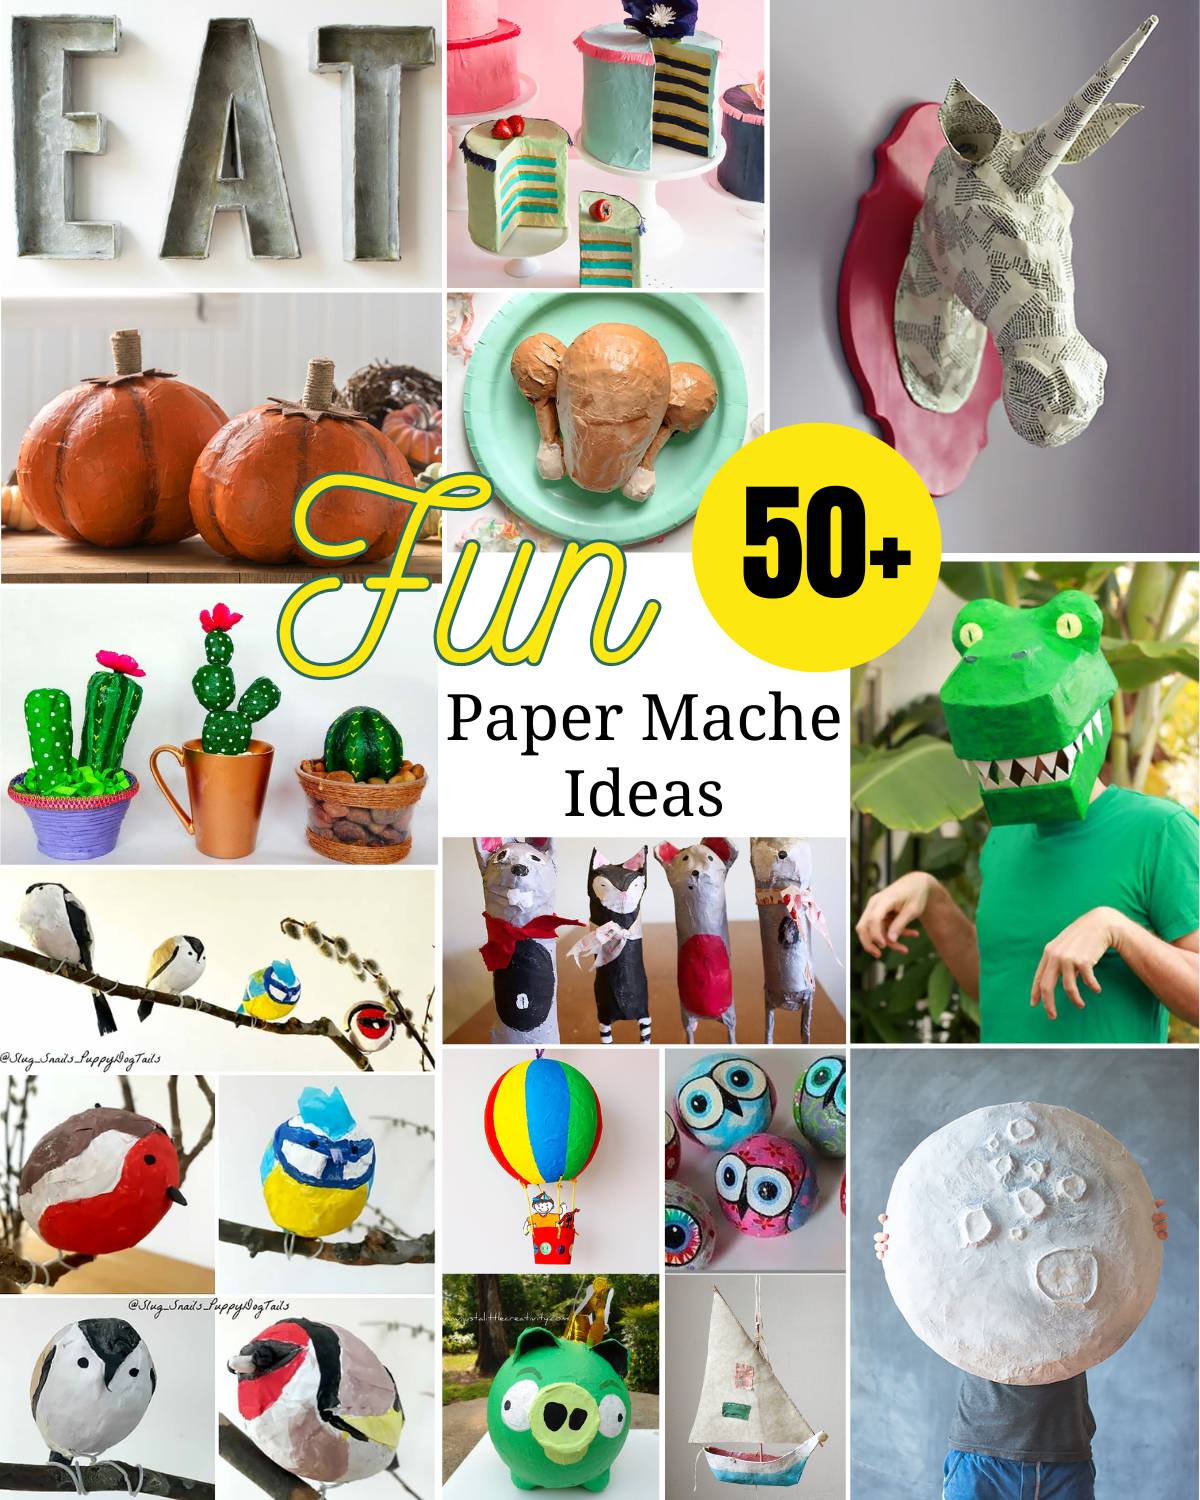 Get inspiration from the nostalgic craft of paper mache with this list of fun DIY paper mache ideas. This isn't a craft for just children, it's for adults too!